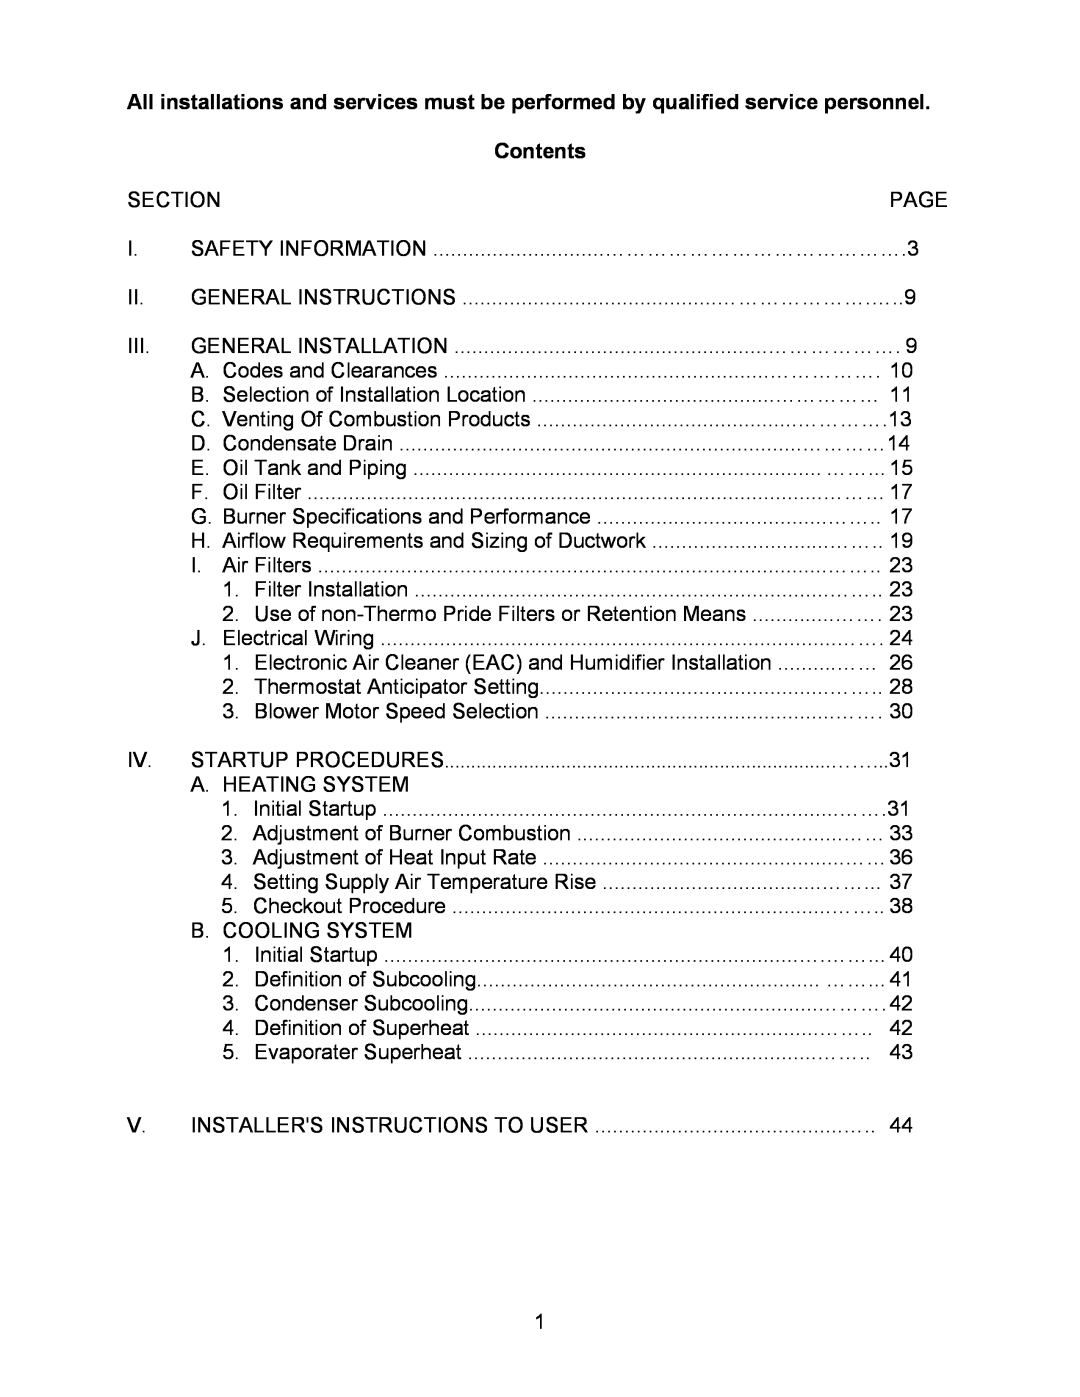 Thermo Products 30, OPB (24, 36)- 80 service manual Contents 